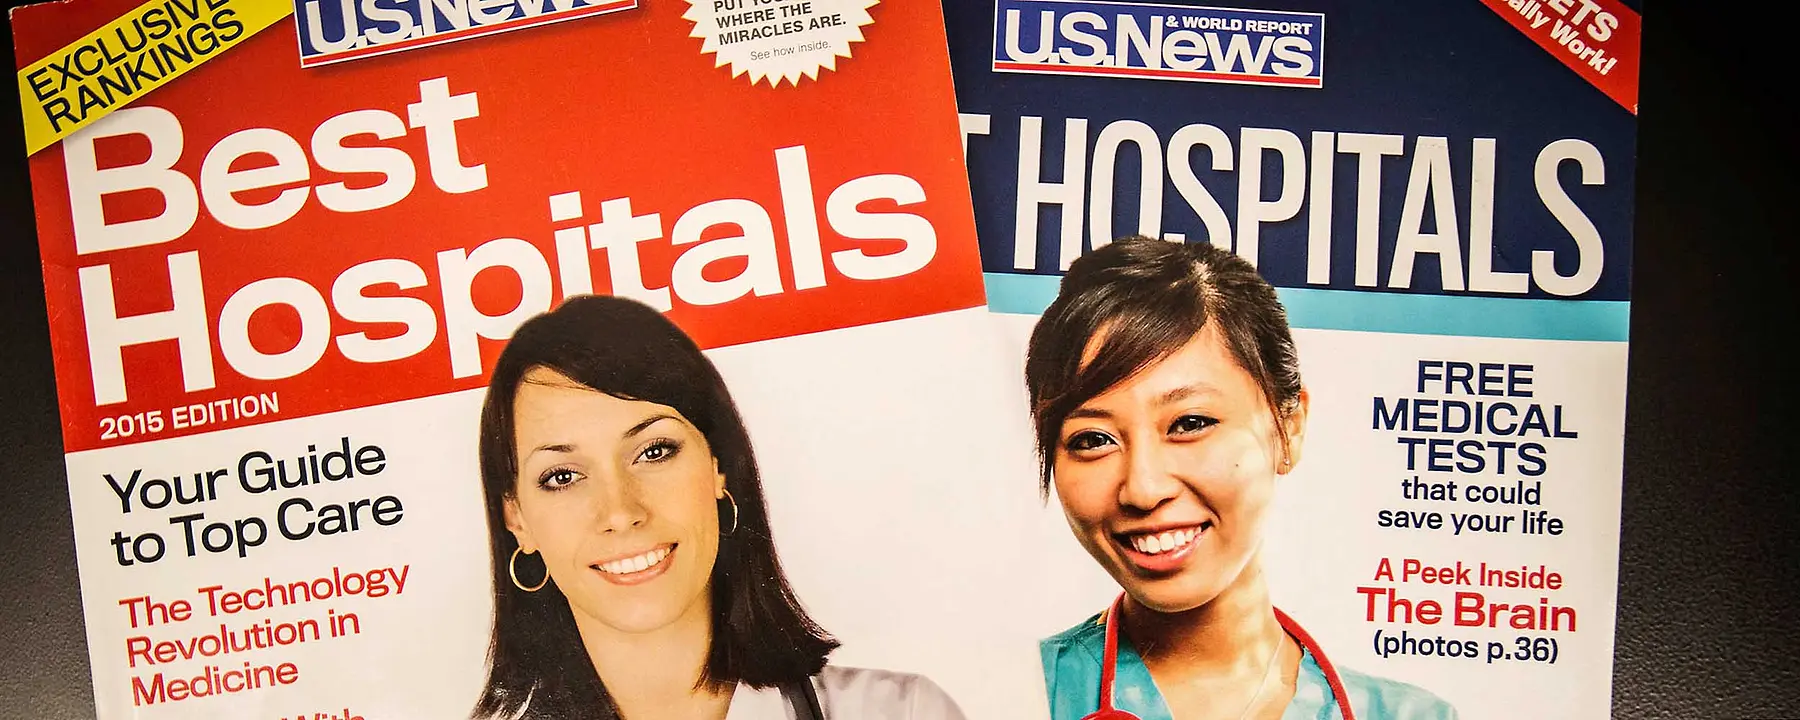 Covers of the 2012 and 2105 Best Hospitals listings